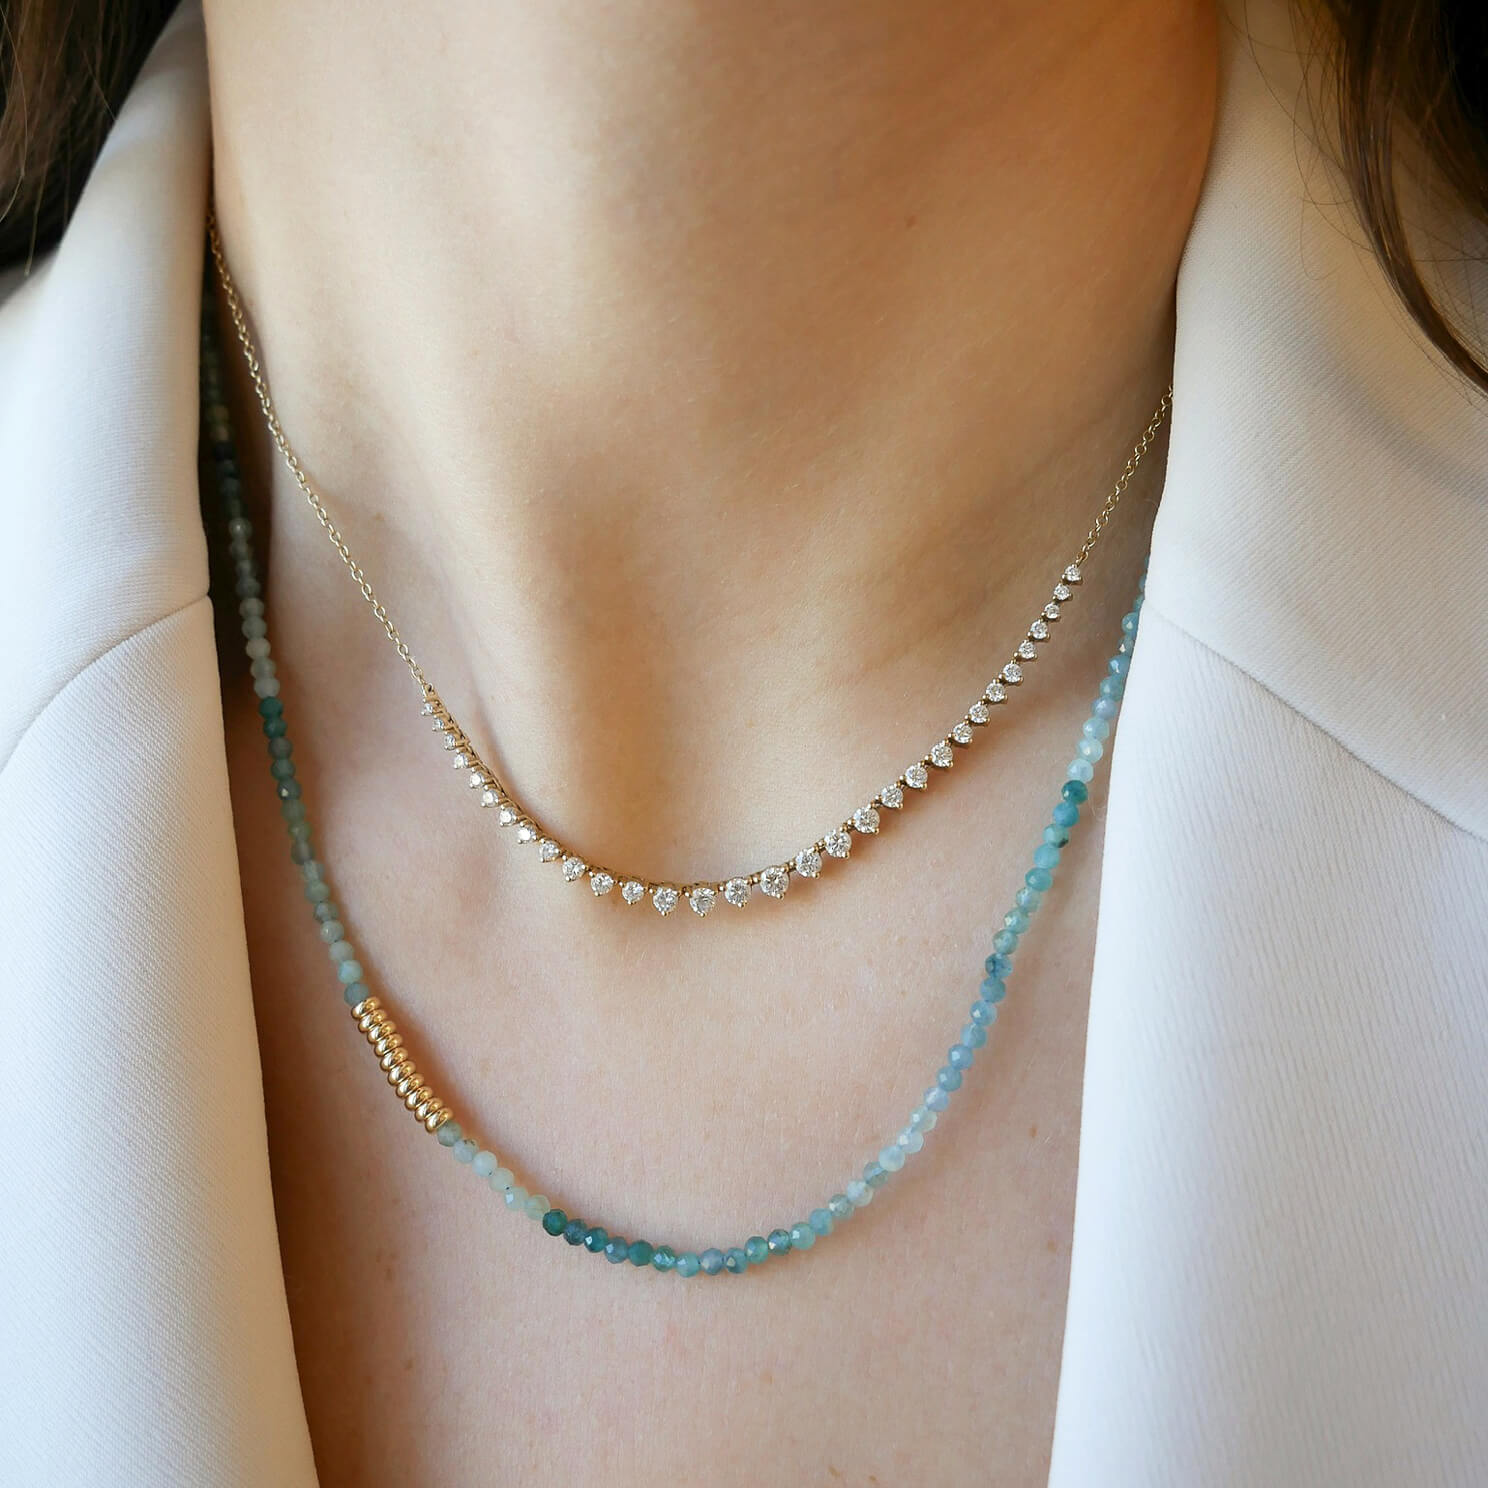 Ombré Tourmaline Birthstone Bead Necklace in 14k yellow gold styled on neck of model with graduated diamond necklace